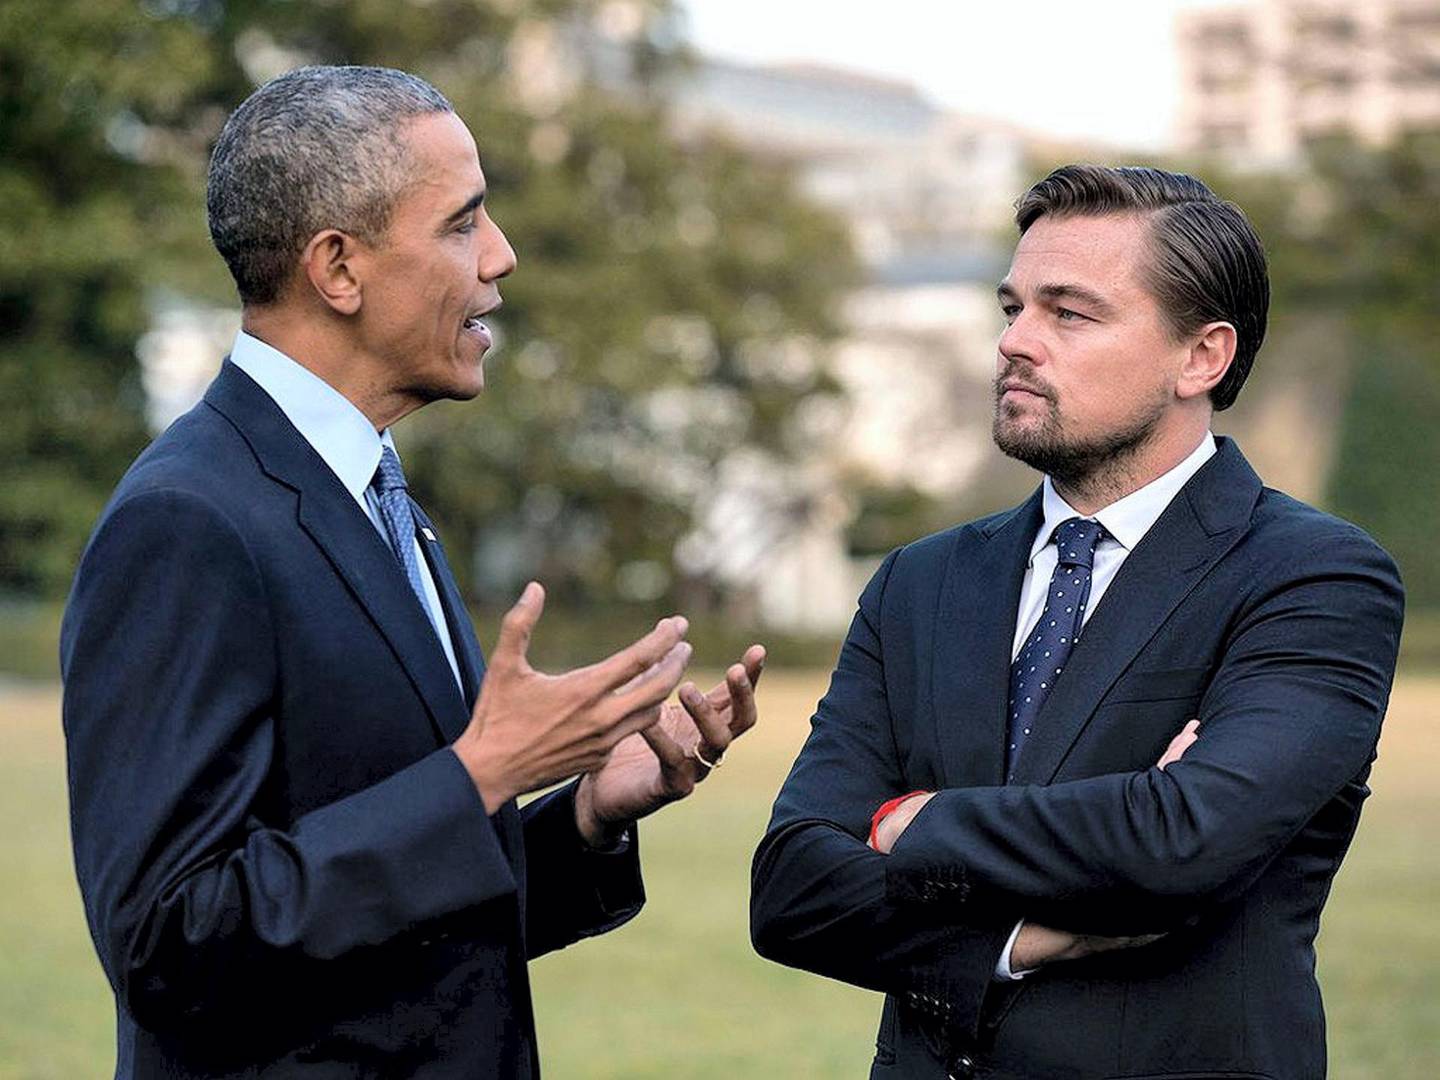 Fame gives celebrities such as Leonardo DiCaprio, pictured with Barack Obama, the ability to move easily between Washington and Hollywood. Getty